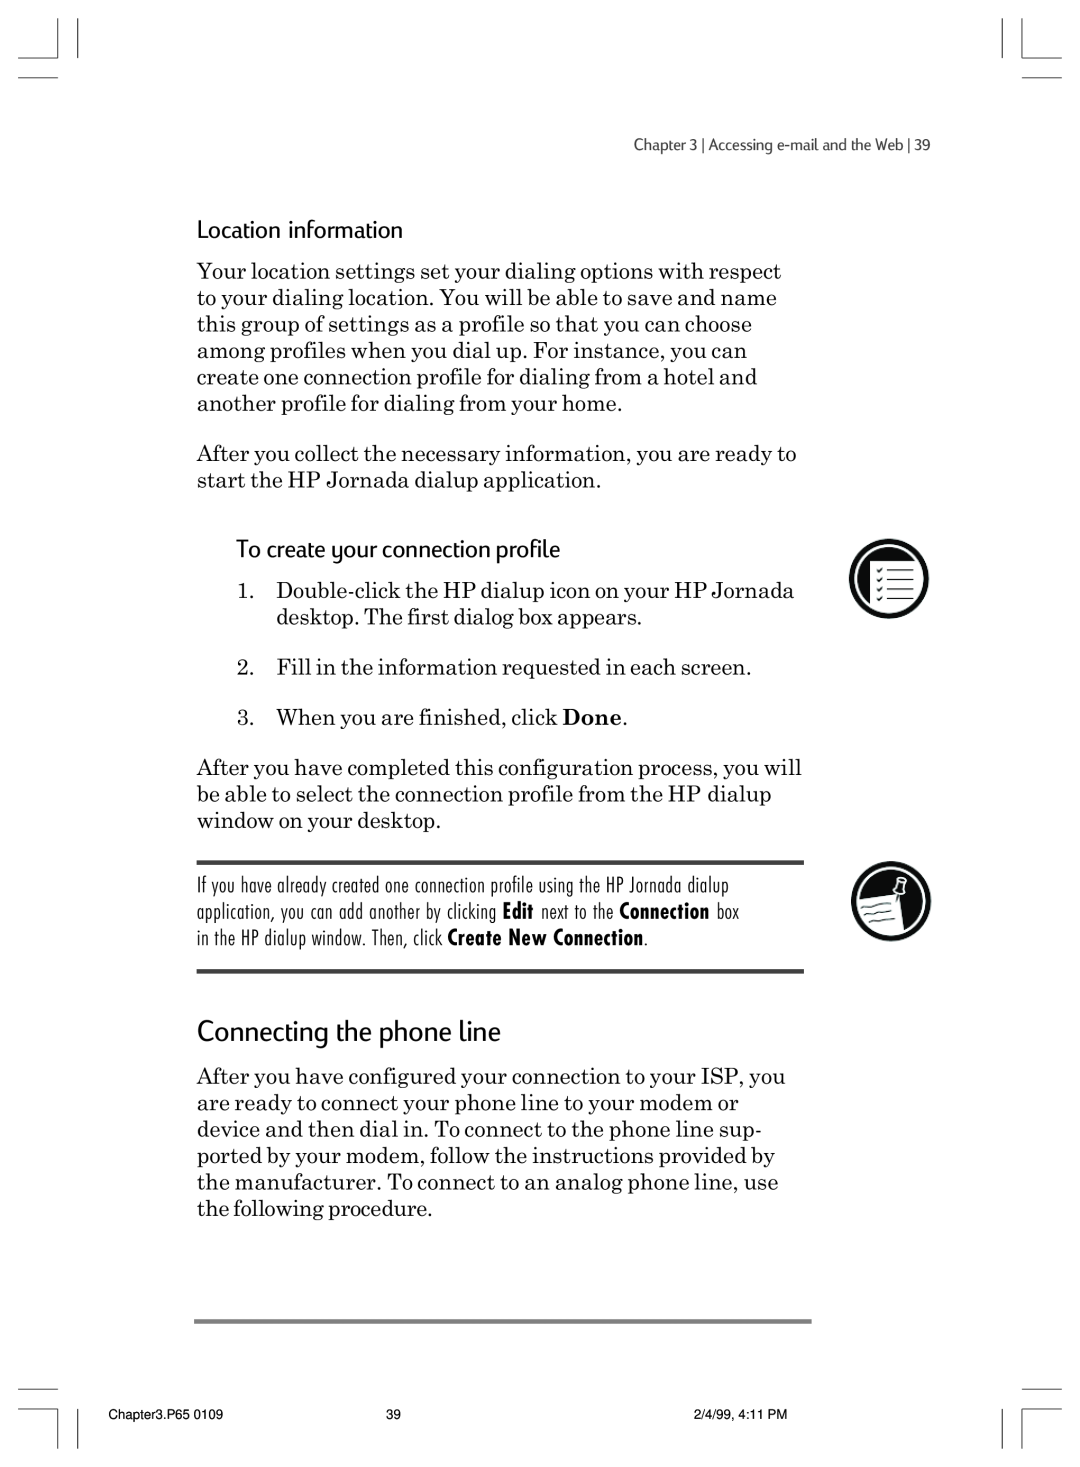 HP 820 E manual Connecting the phone line, Location information, To create your connection profile 